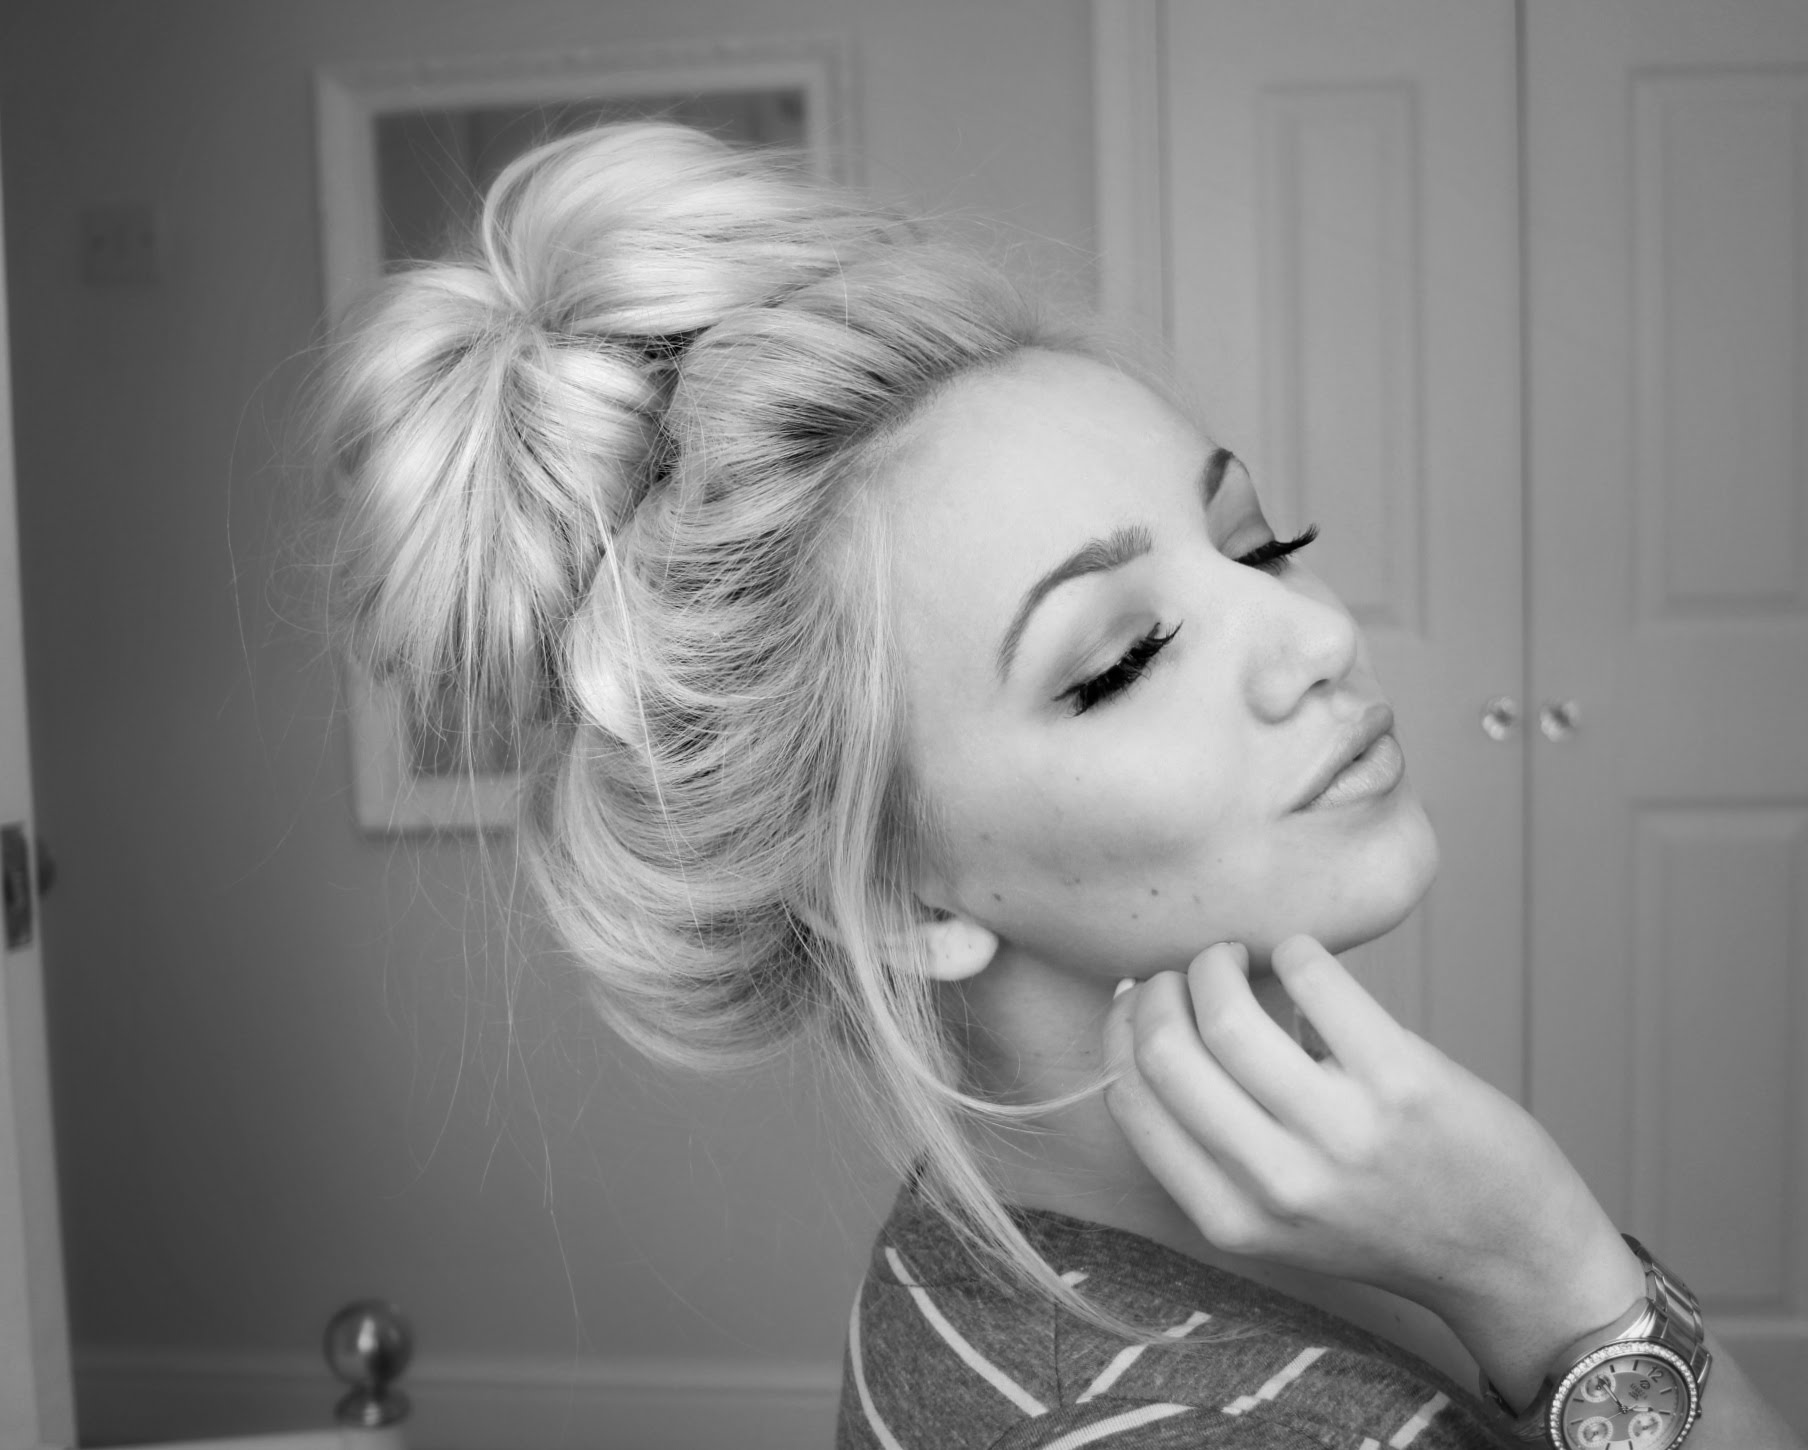 9. "Blonde Messy Bun: The Perfect Tomboy Updo" - wide 4